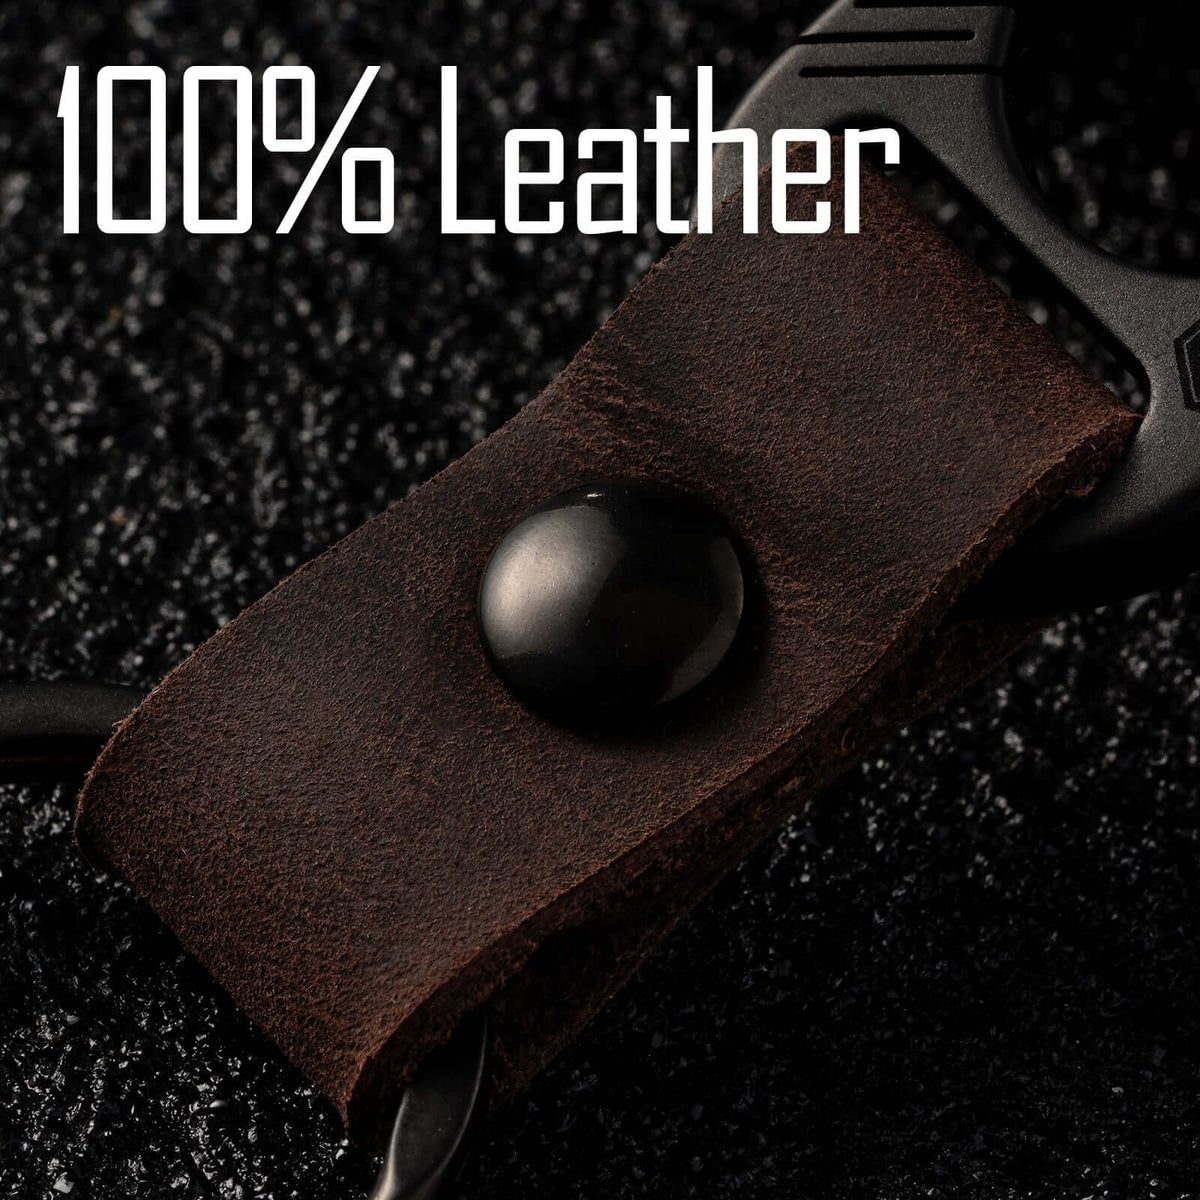 KM02 Titanium Alloy Keychain Clip with Leather (PVD BLACK)